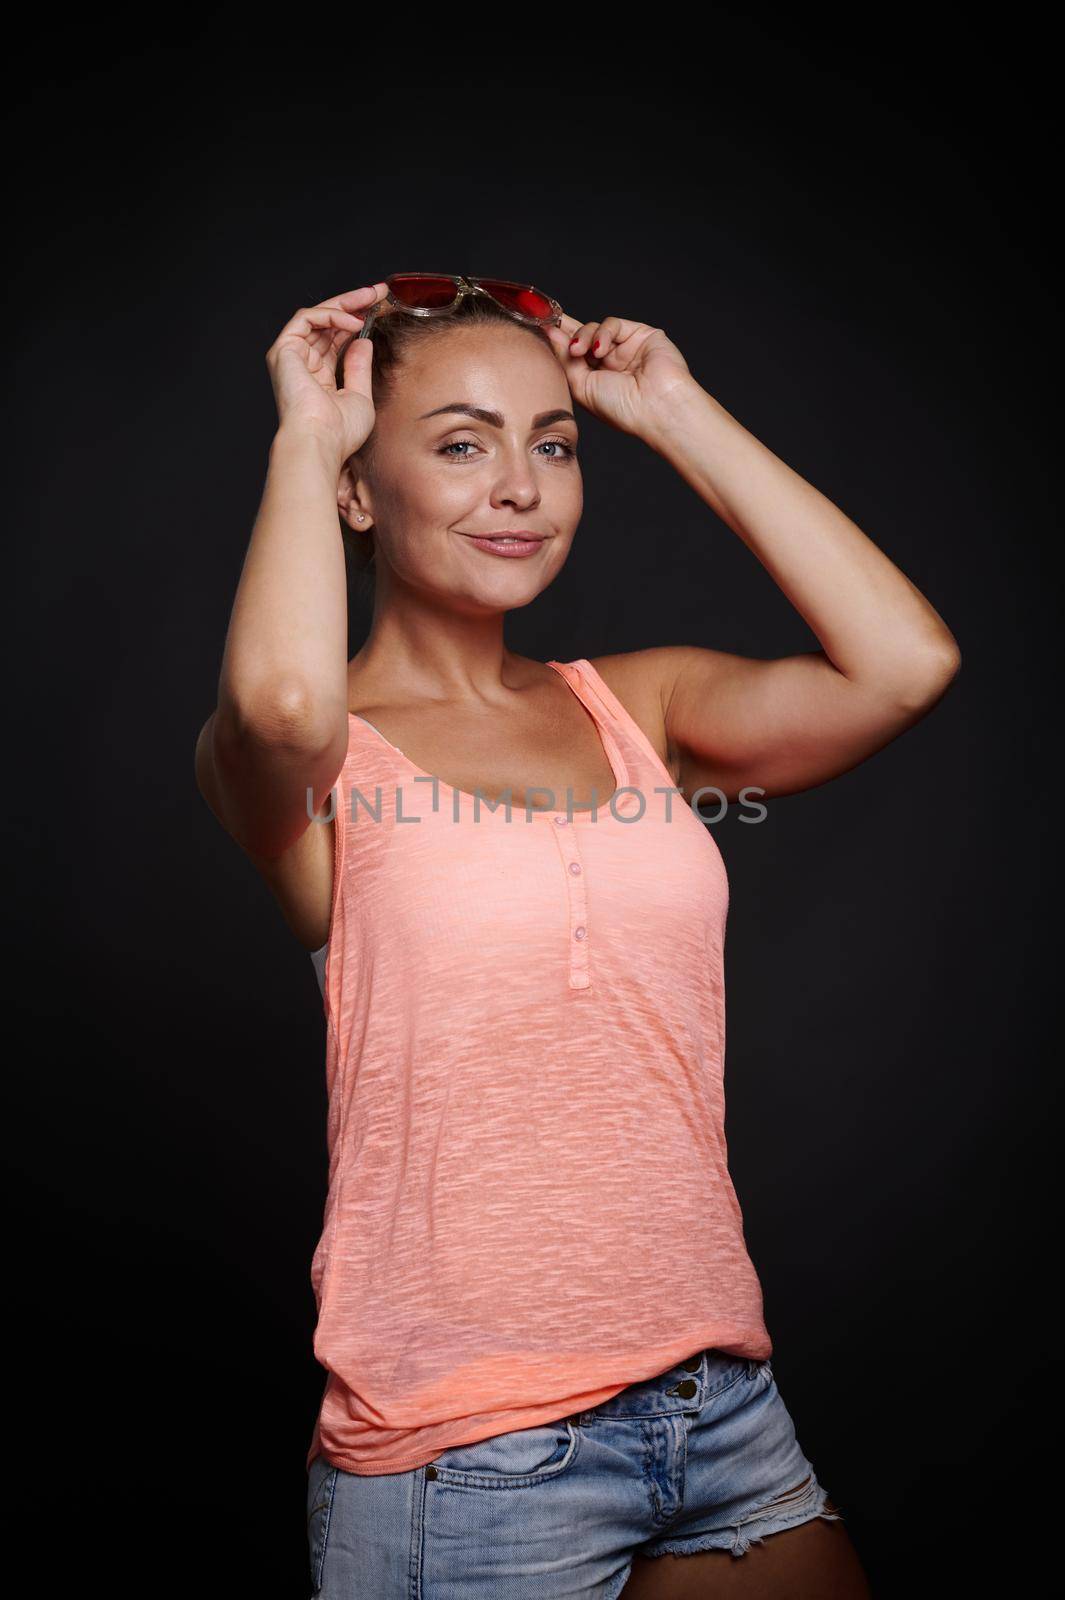 Attractive blonde Caucasian woman with tanned skin and beautiful fit body holding her hands near her face and confidently looking at camera against black background with copy ad space